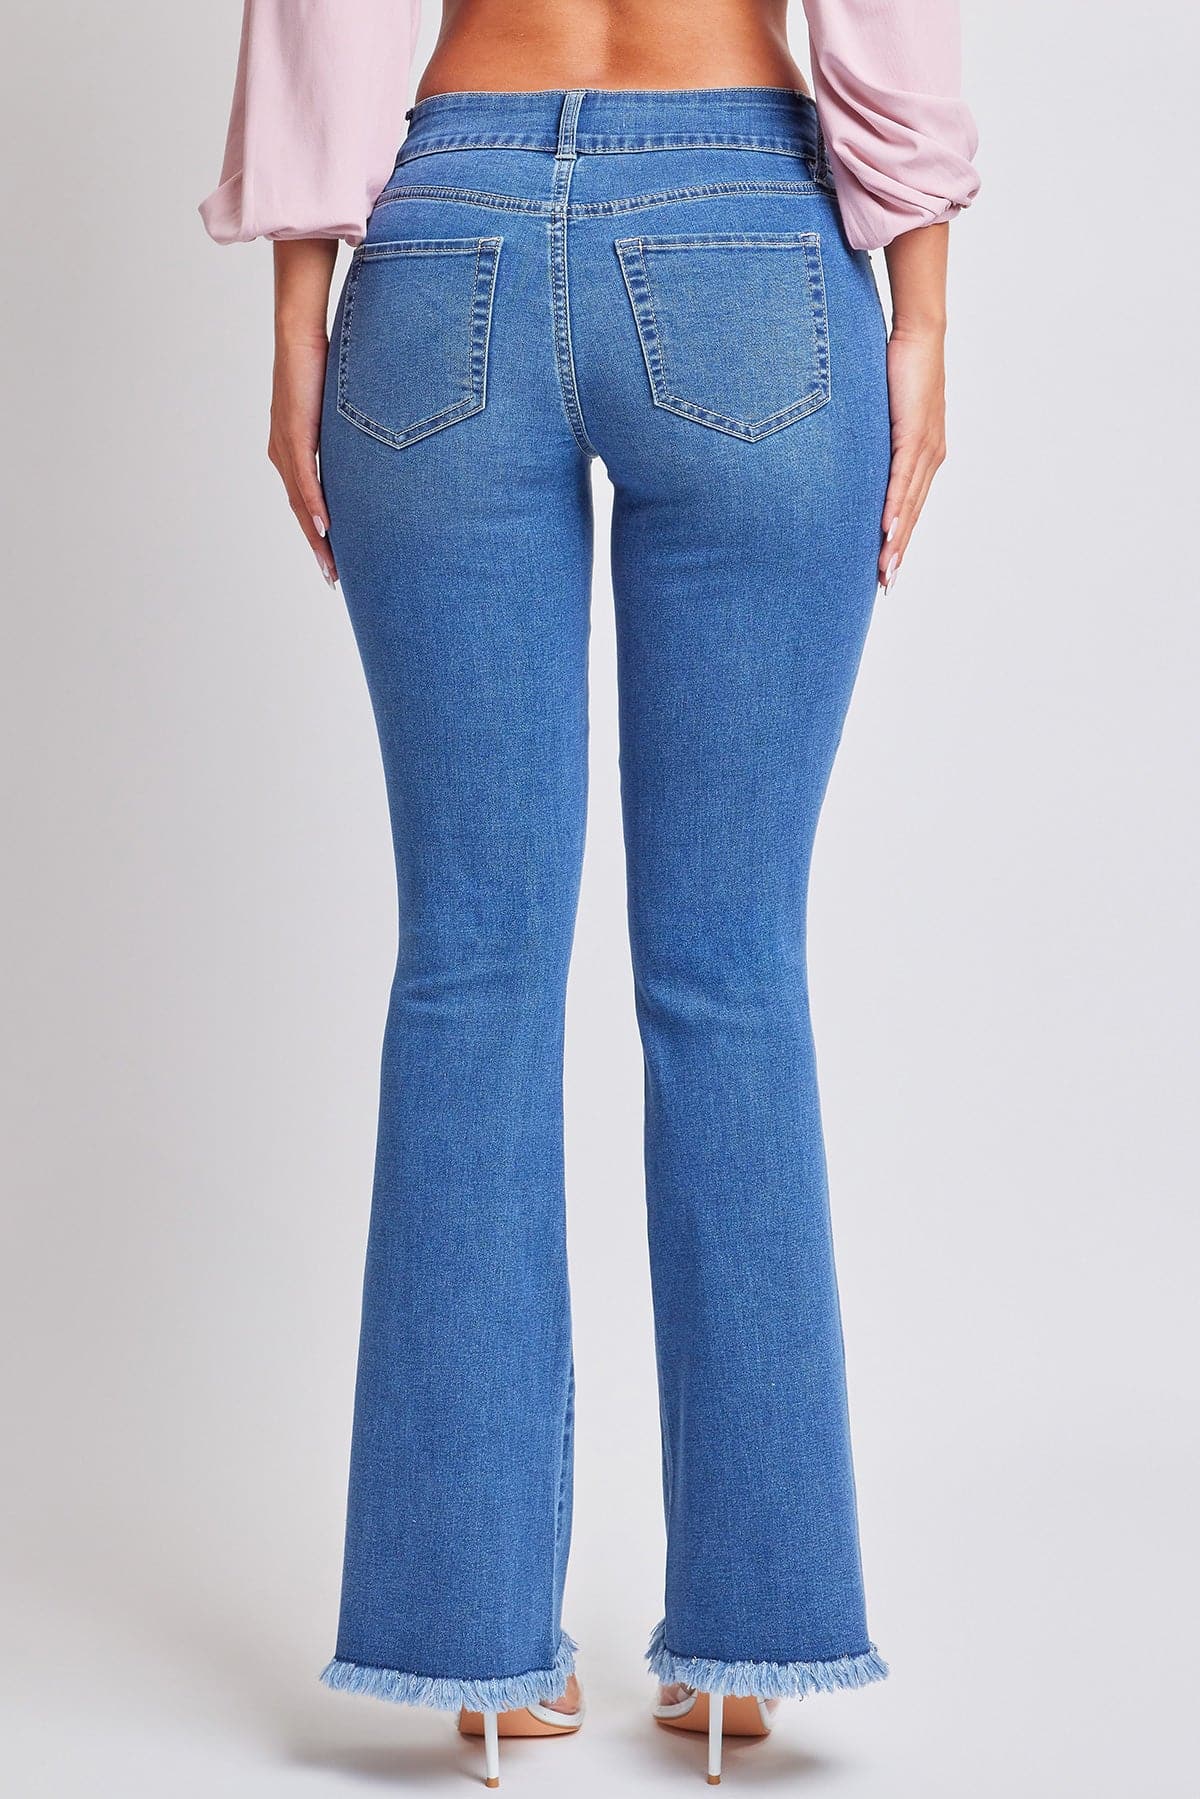 Women's Flare Denim Jeans With Belt Buckle Feature